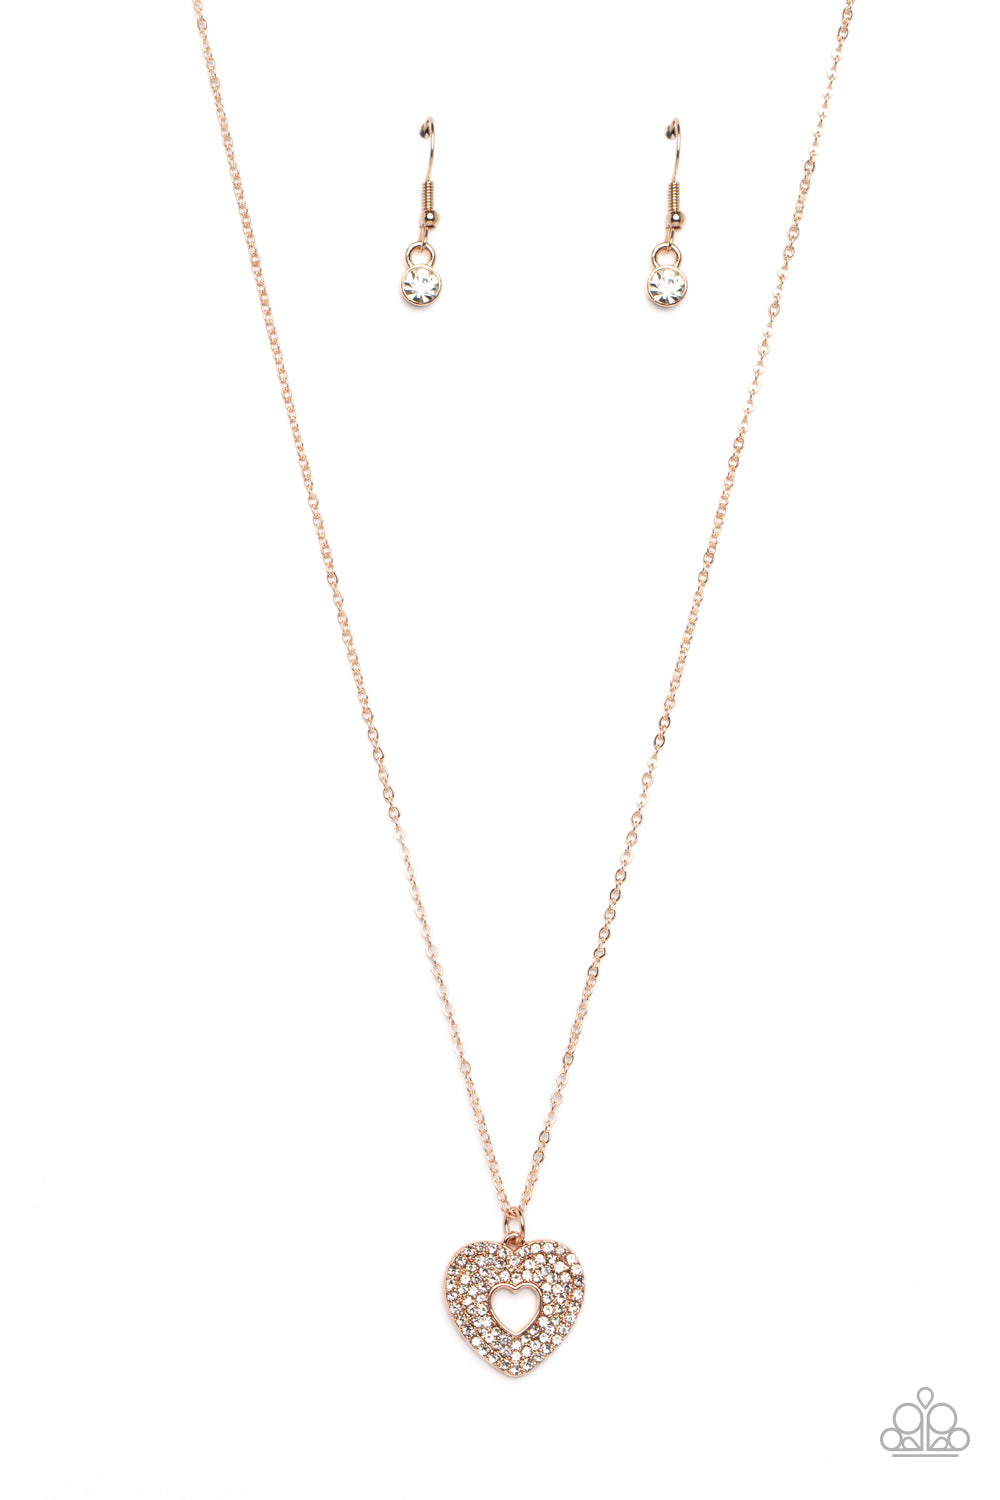 Romantic Retreat Paparazzi Accessories Necklace with Earrings Rose Gold